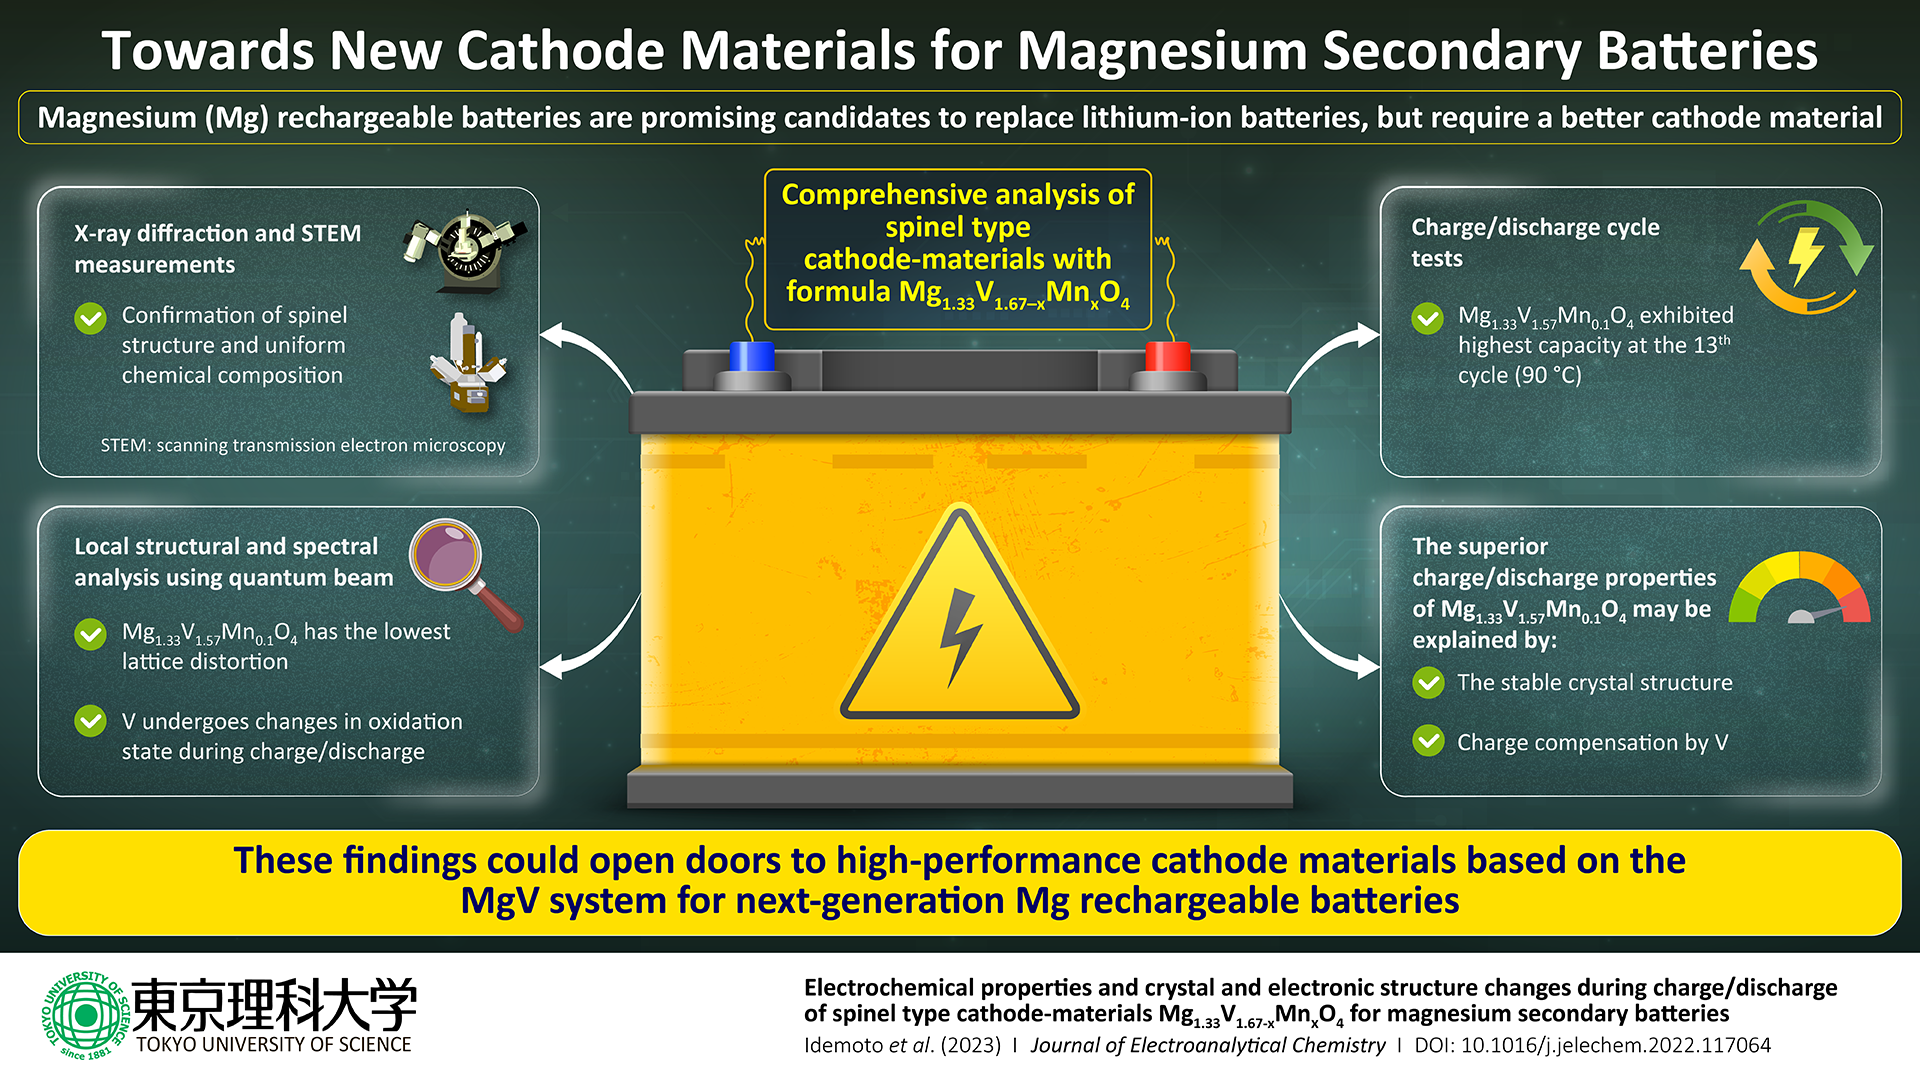 Beyond Lithium: A Promising Cathode Material for Magnesium Rechargeable Batteries